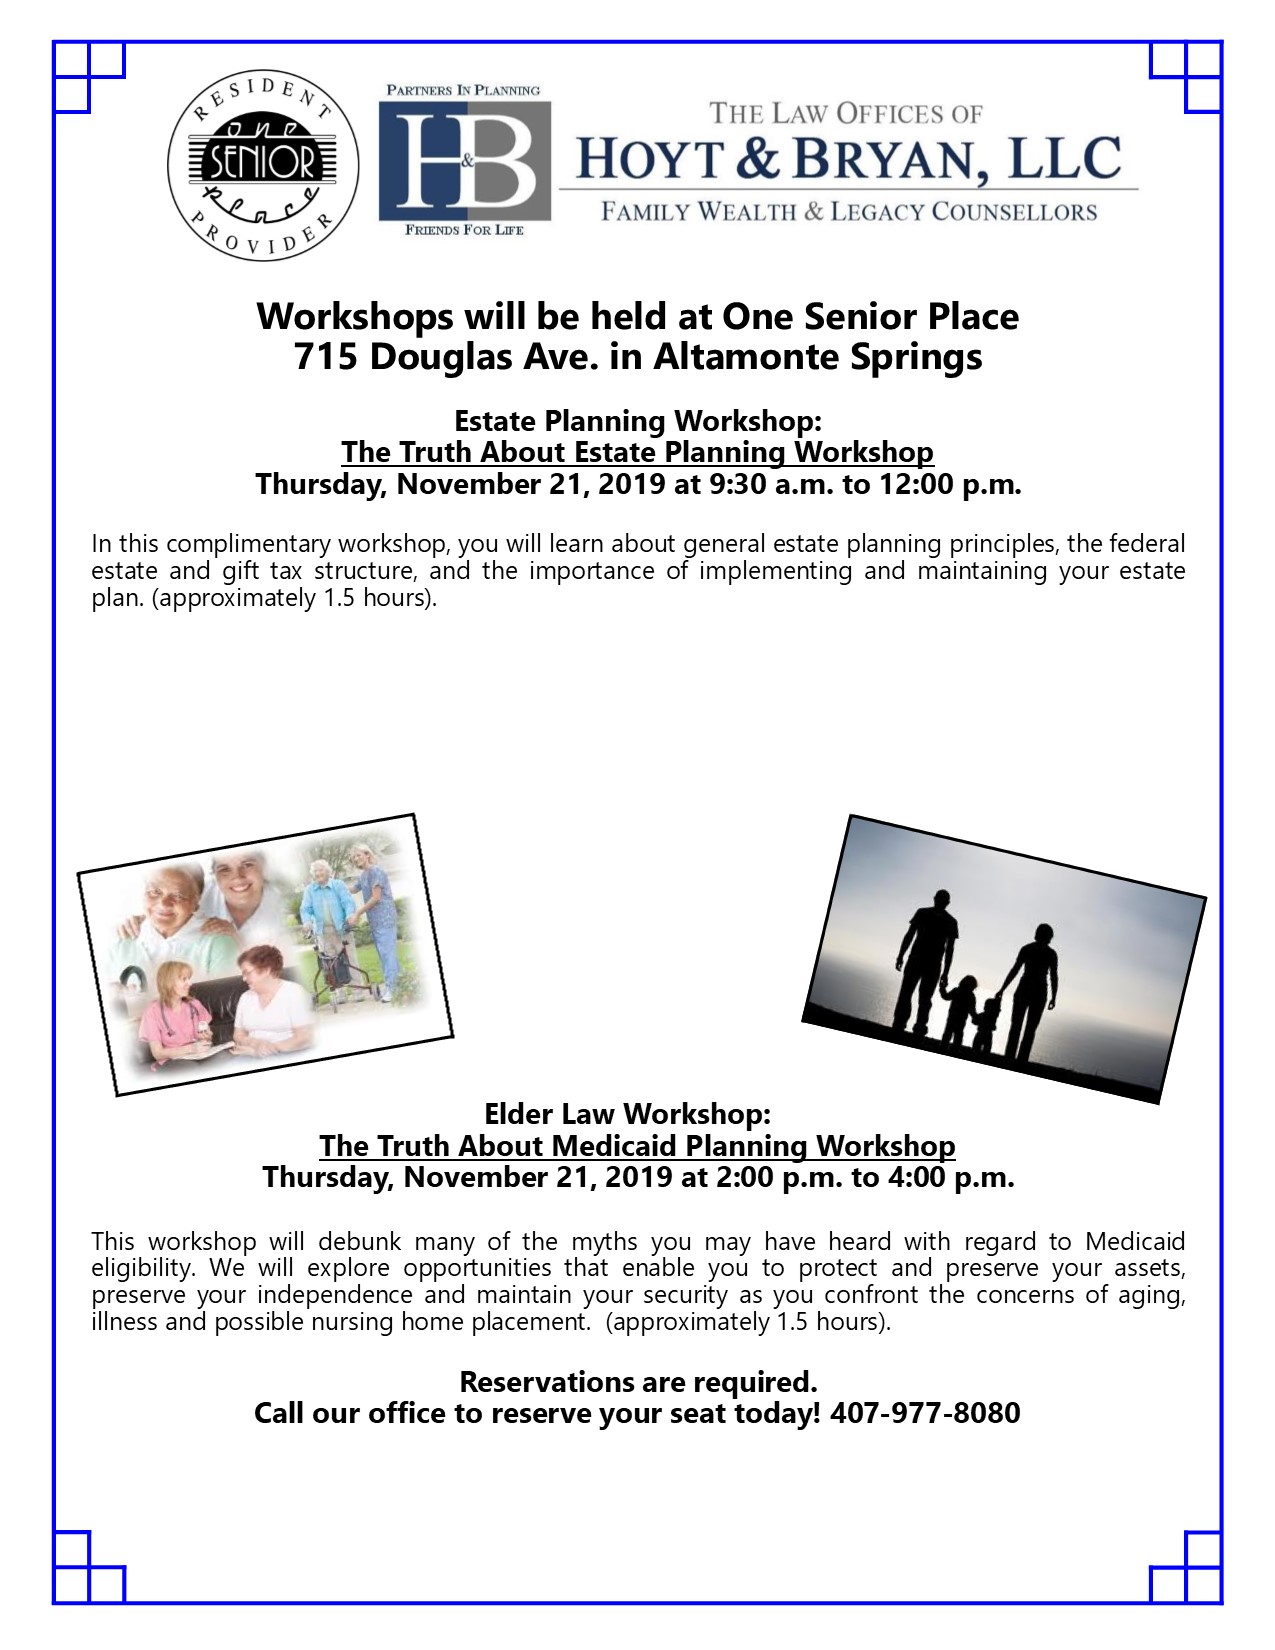 The Truth About Estate Planning Workshop